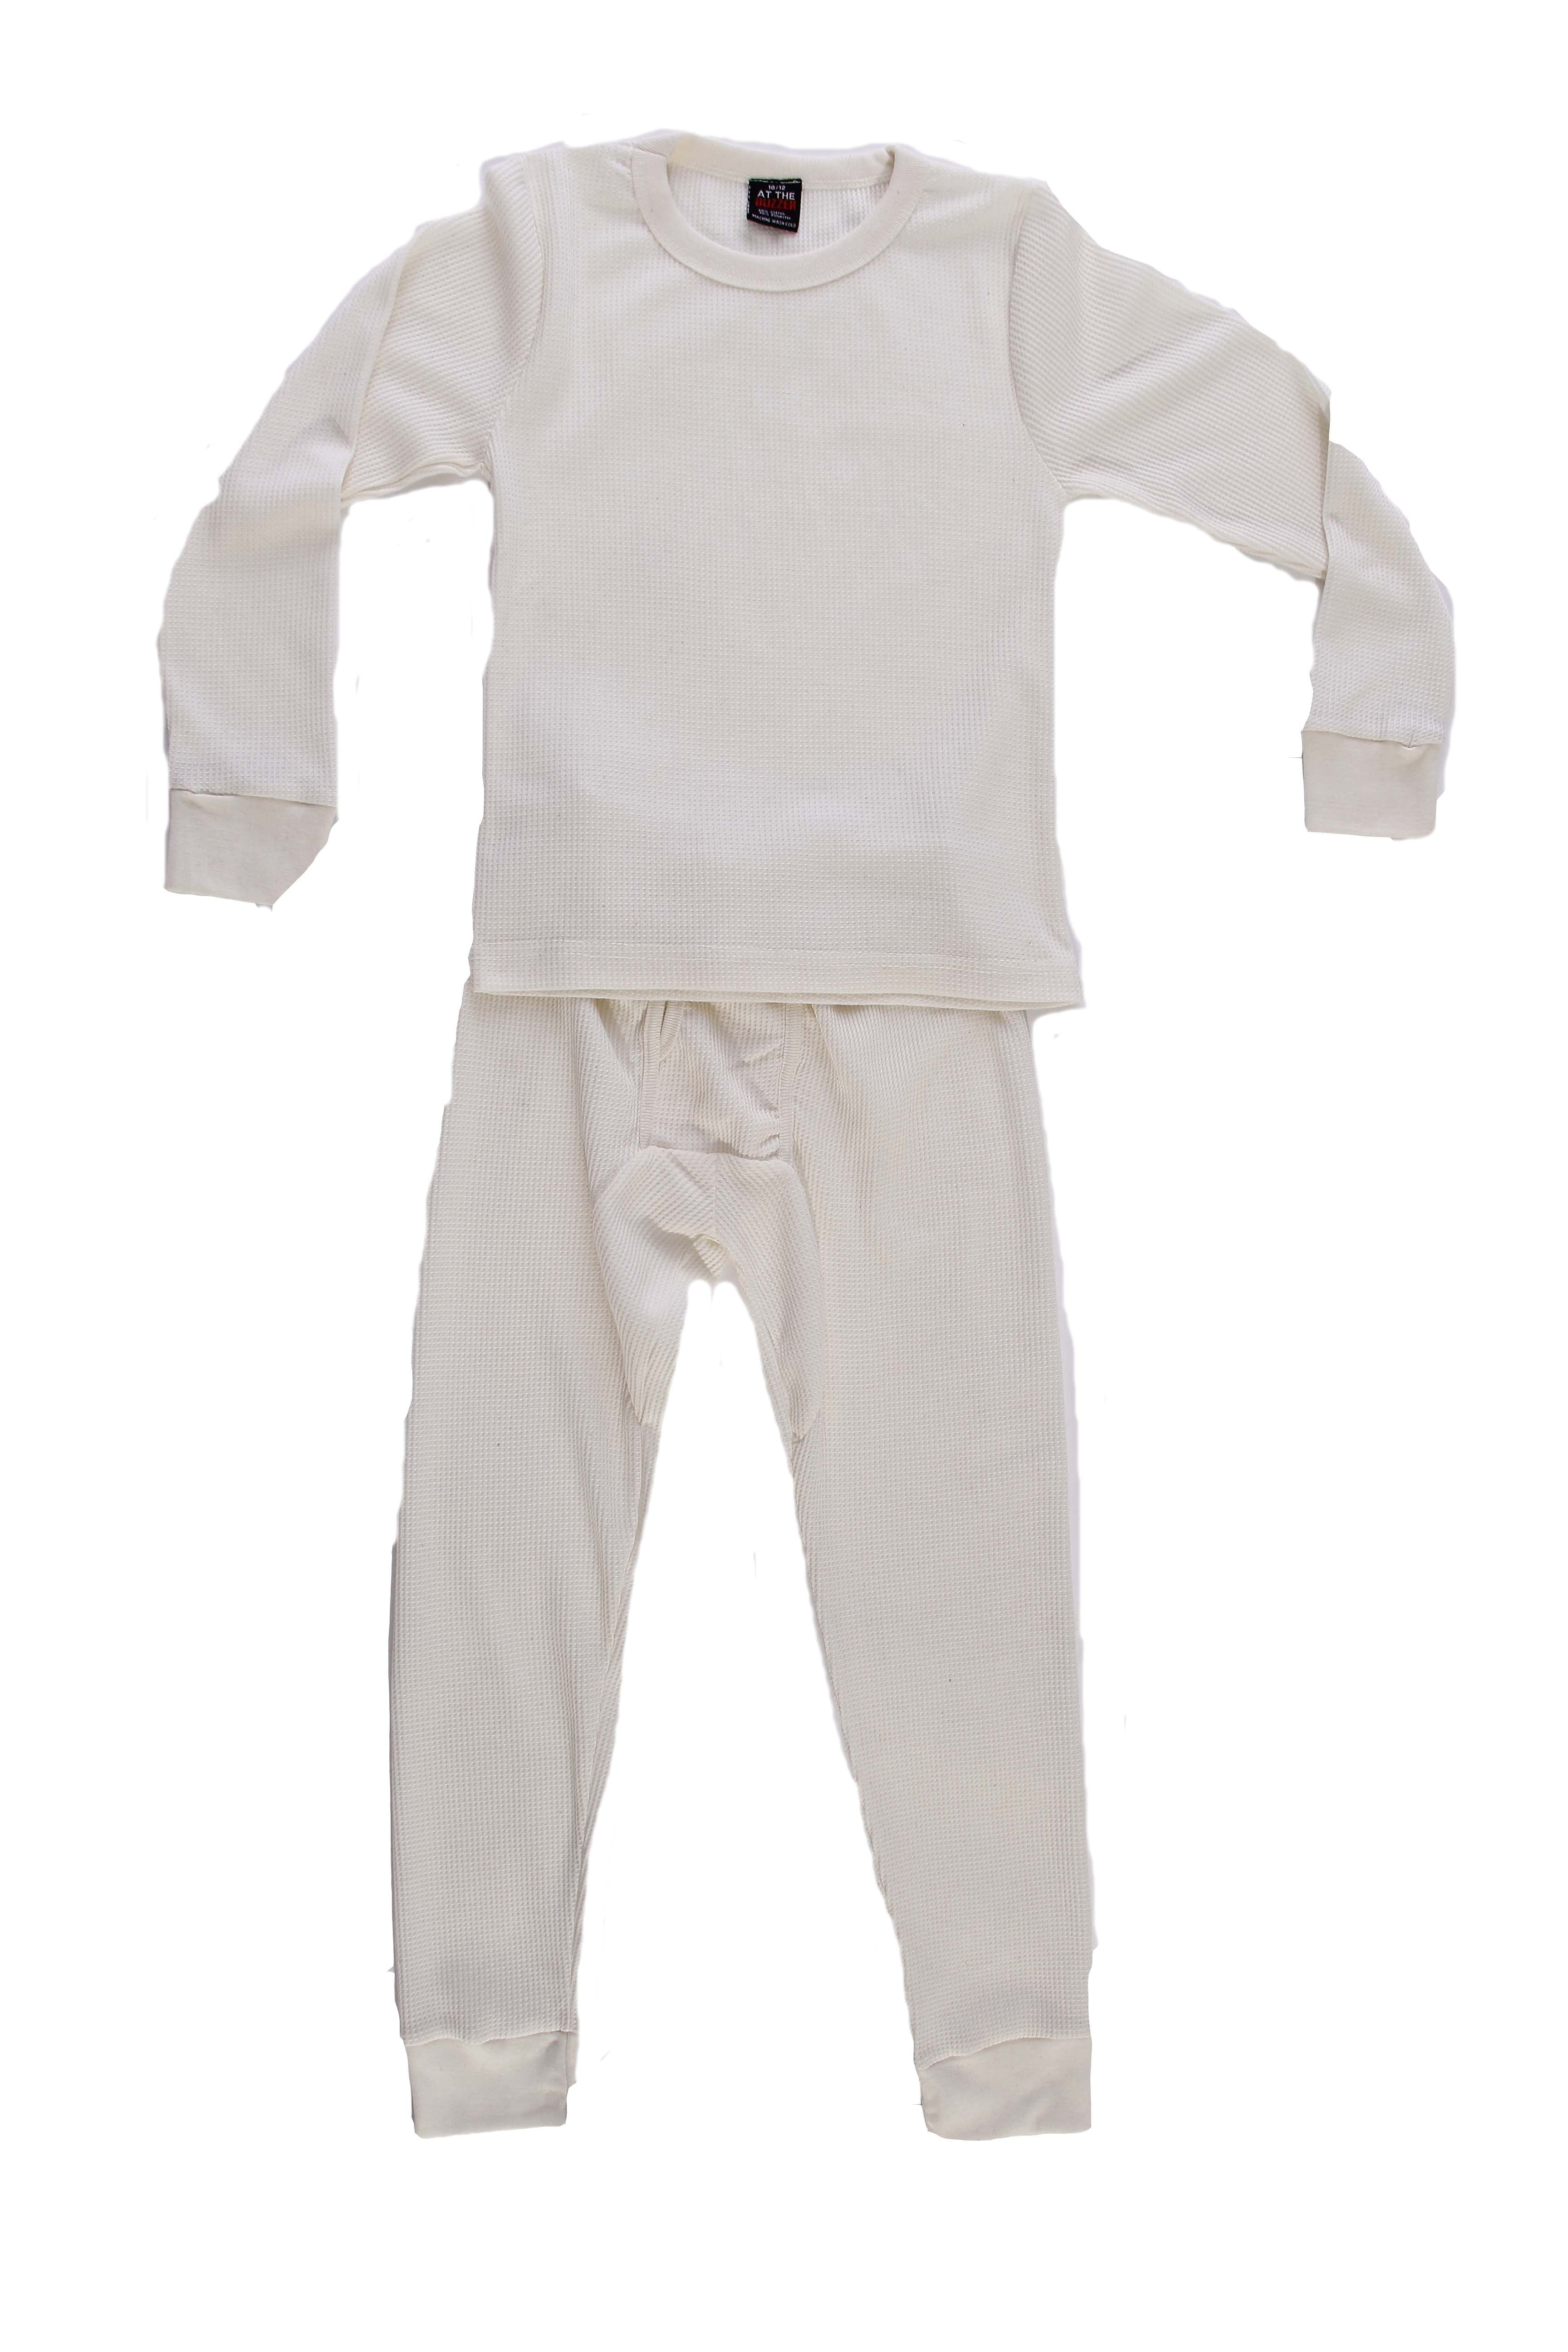 At The Buzzer Thermal Underwear Set for Boys 